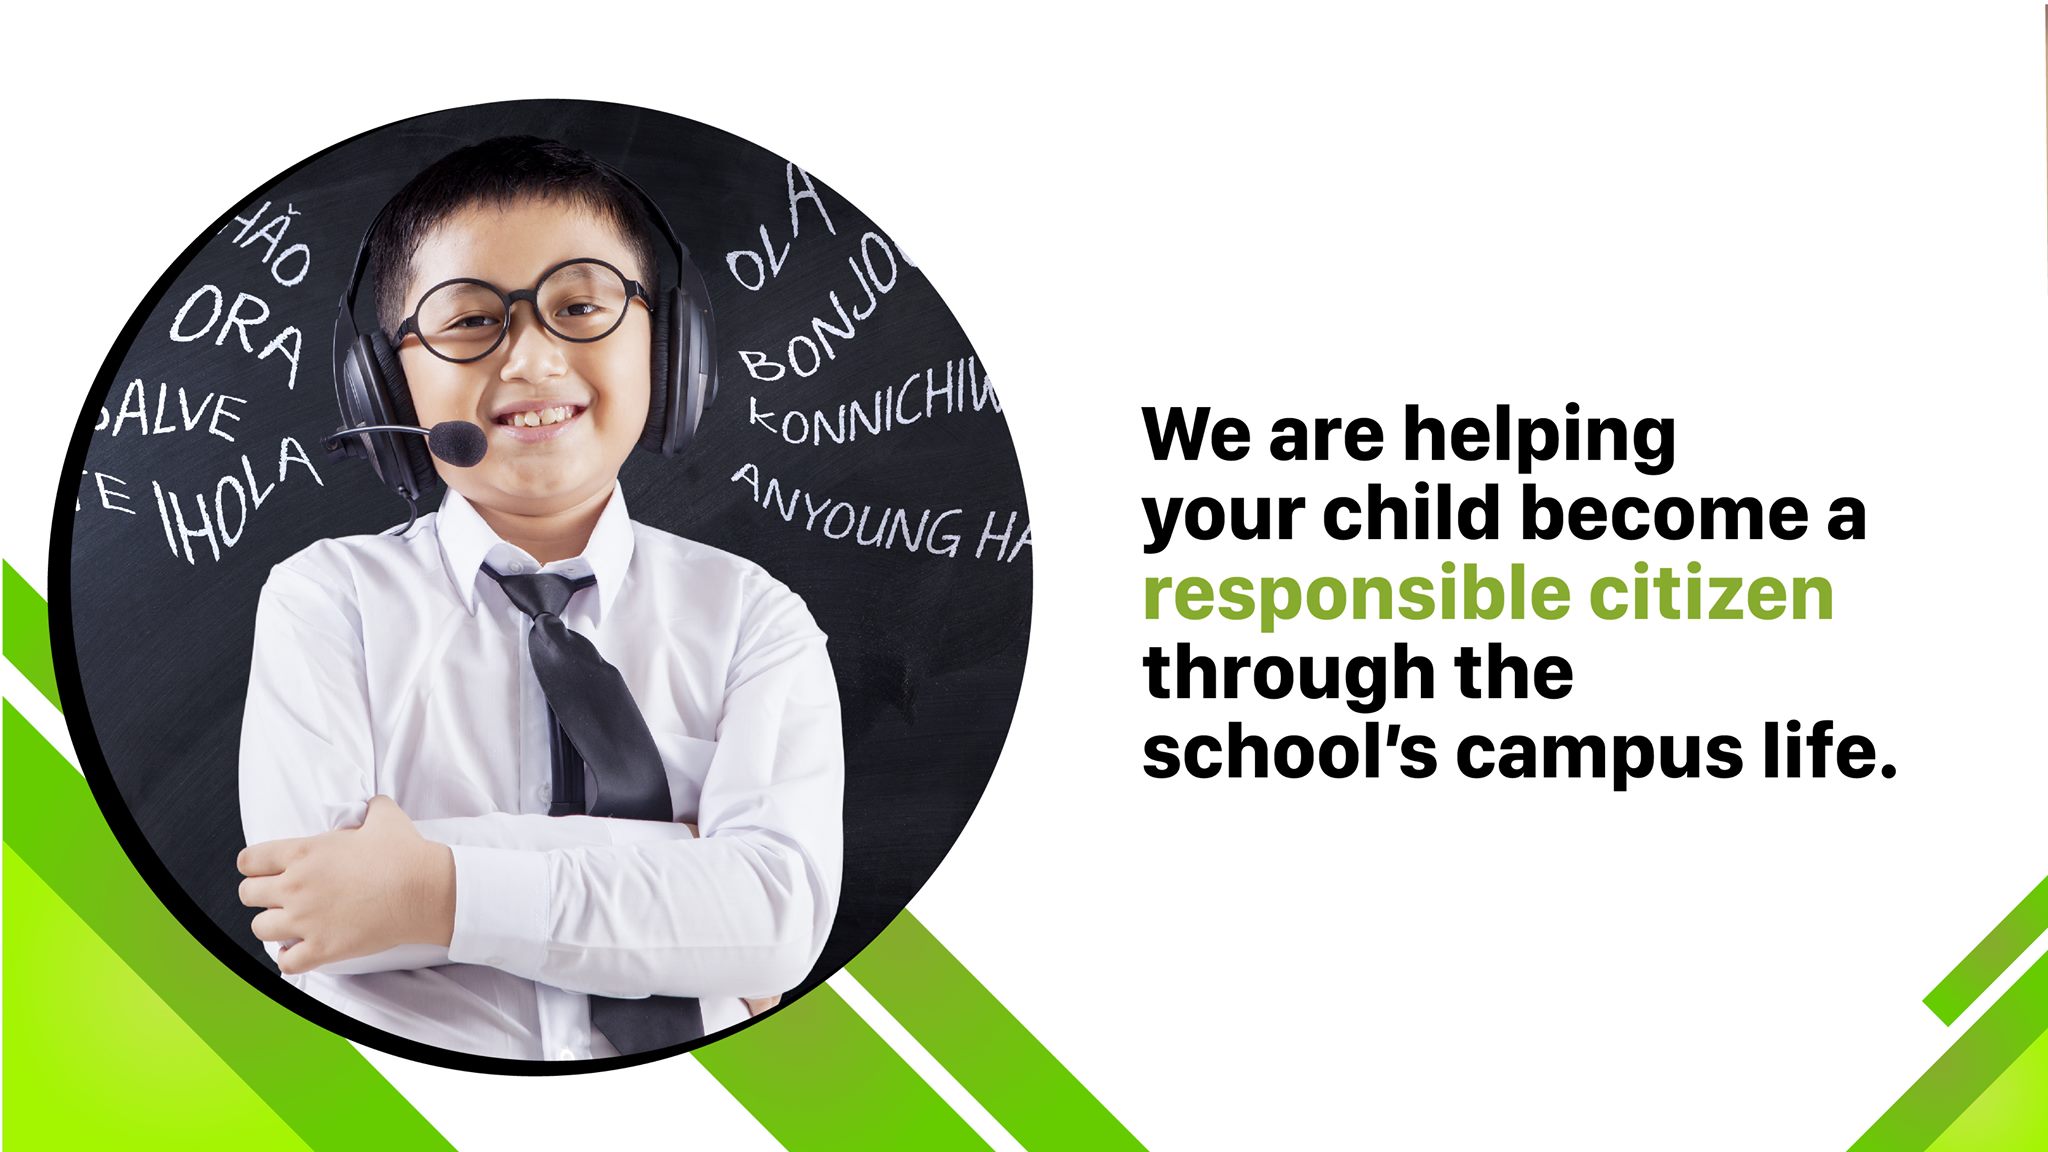 Child become a responsible citizen through the school campus life